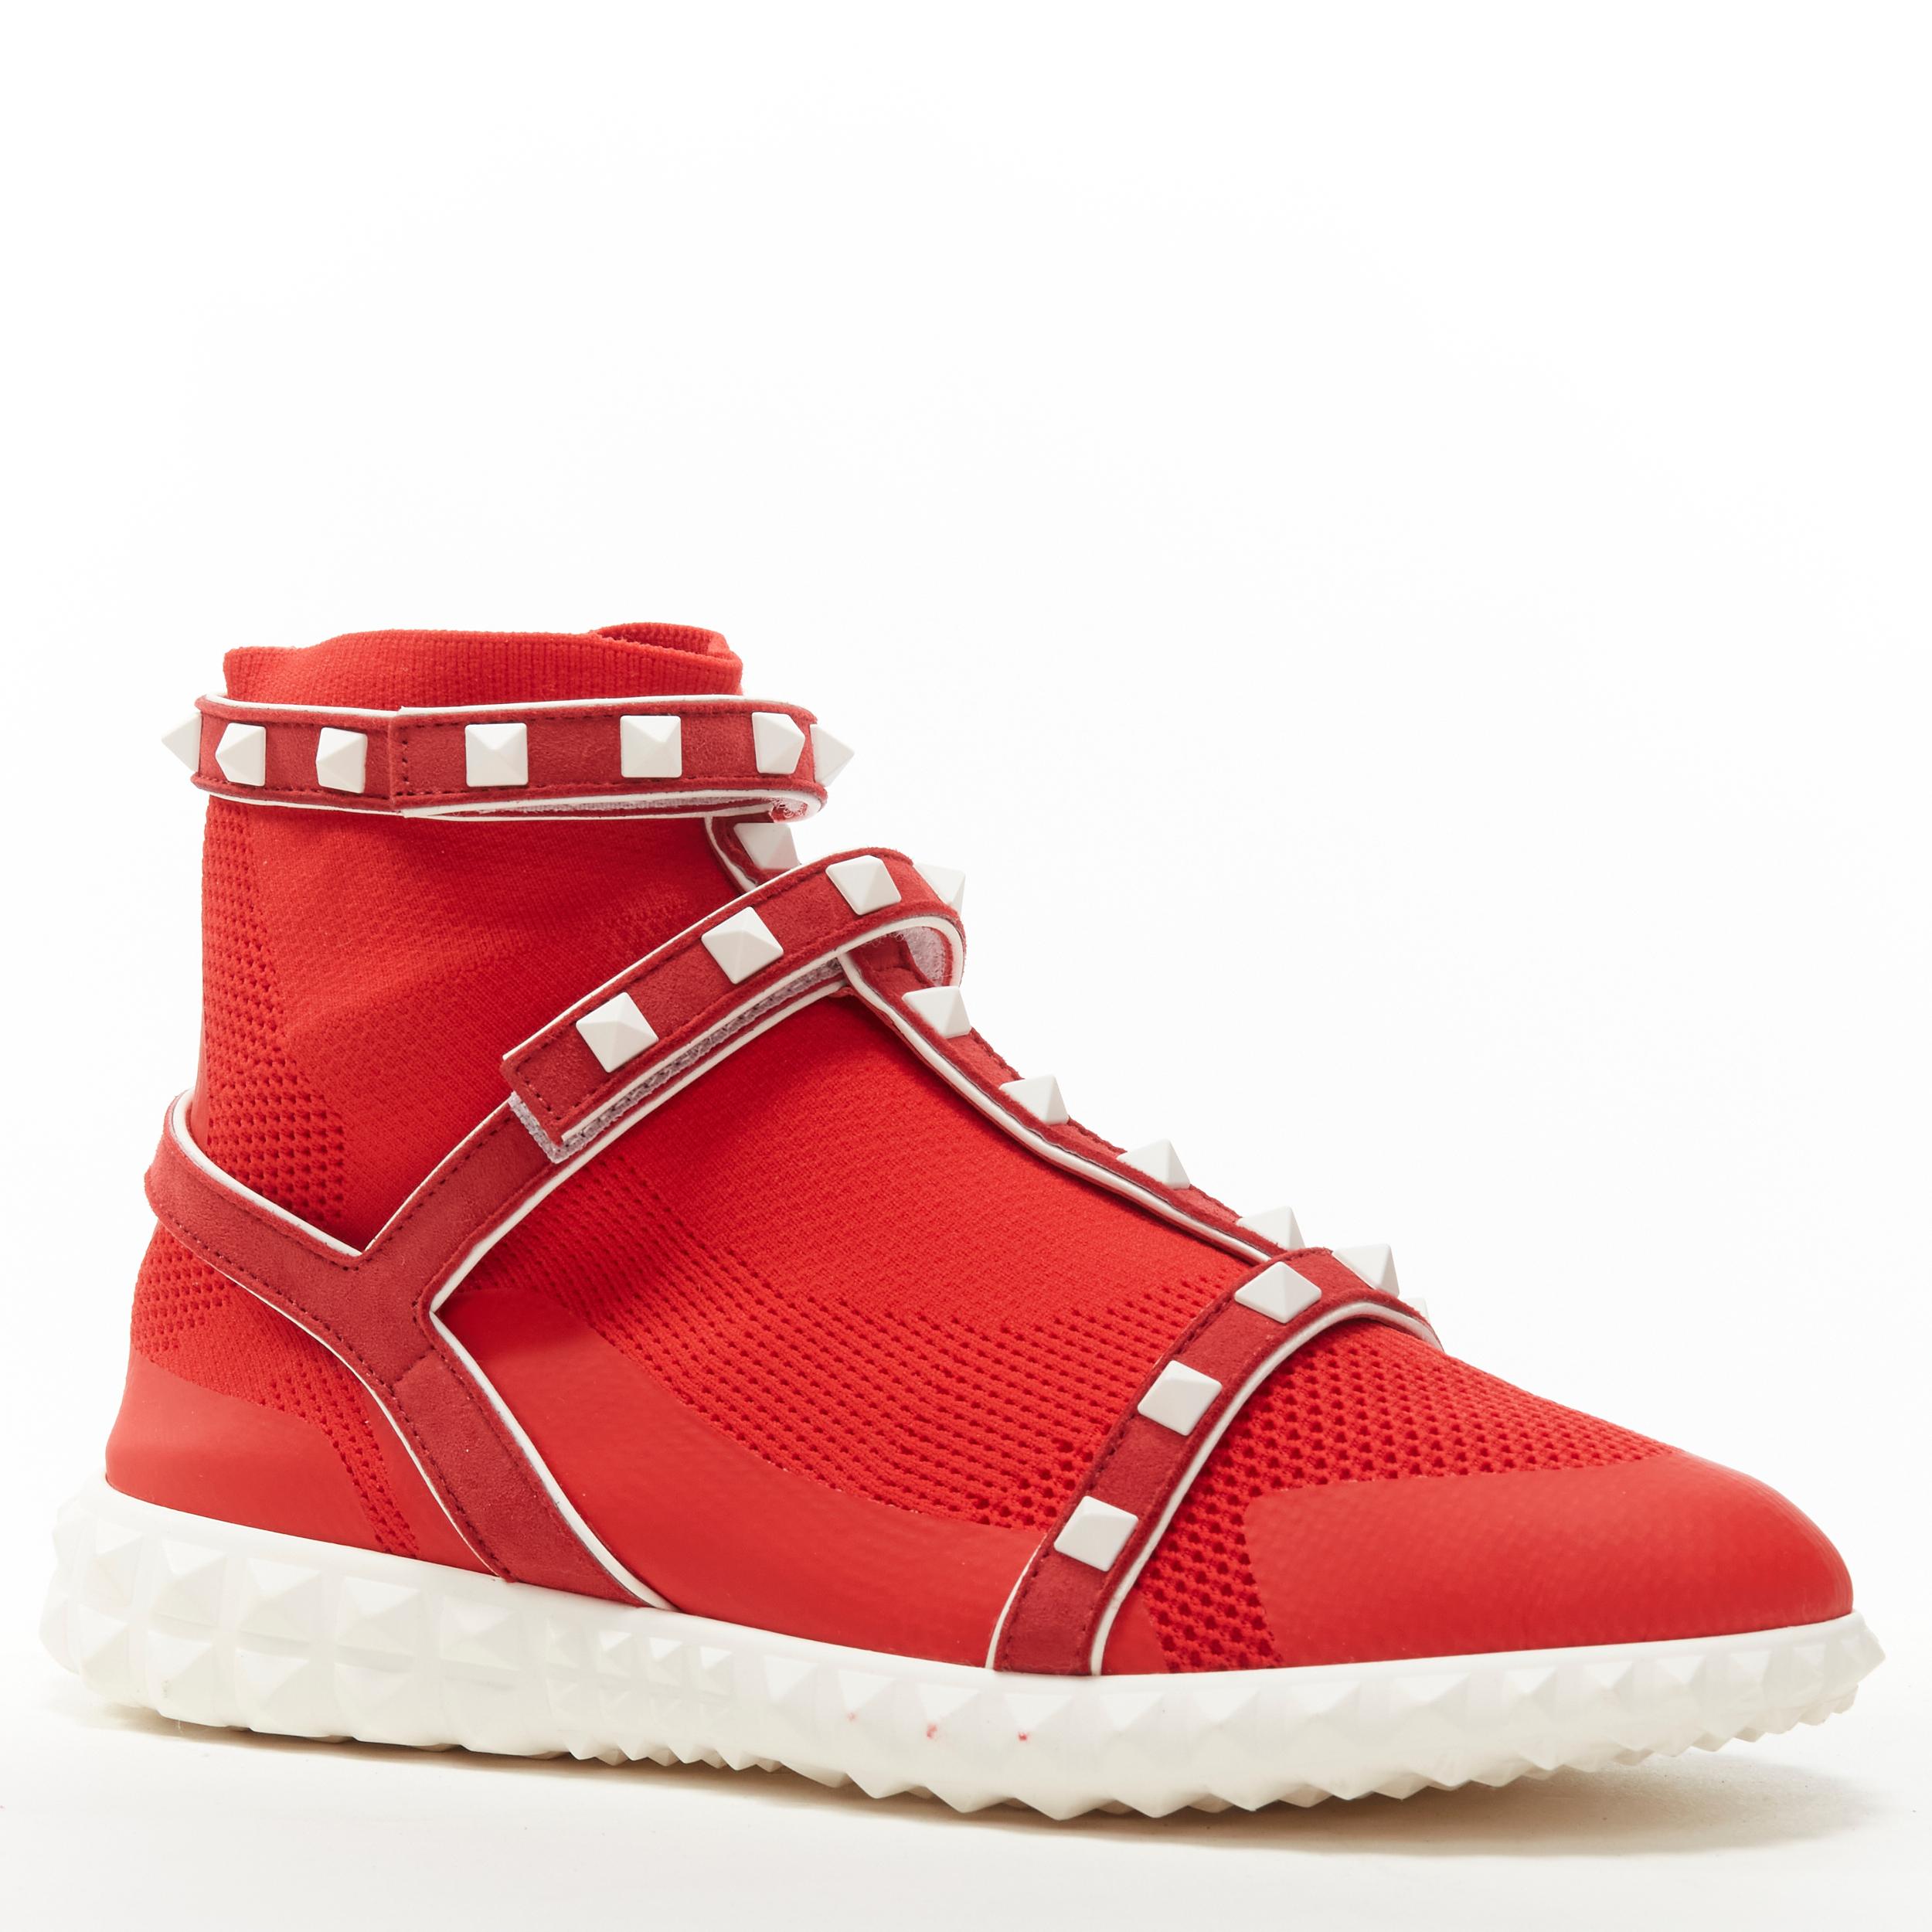 VALENTINO Free Rockstud Bodytech red sock knit white stud high top sneaker EU36 
Reference: ANWU/A00176 
Brand: Valentino 
Model: Free Rockstud 
Material: Fabric 
Color: Red 
Pattern: Solid 
Closure: Magic Tape 
Extra Detail: Sock fabric knit upper.